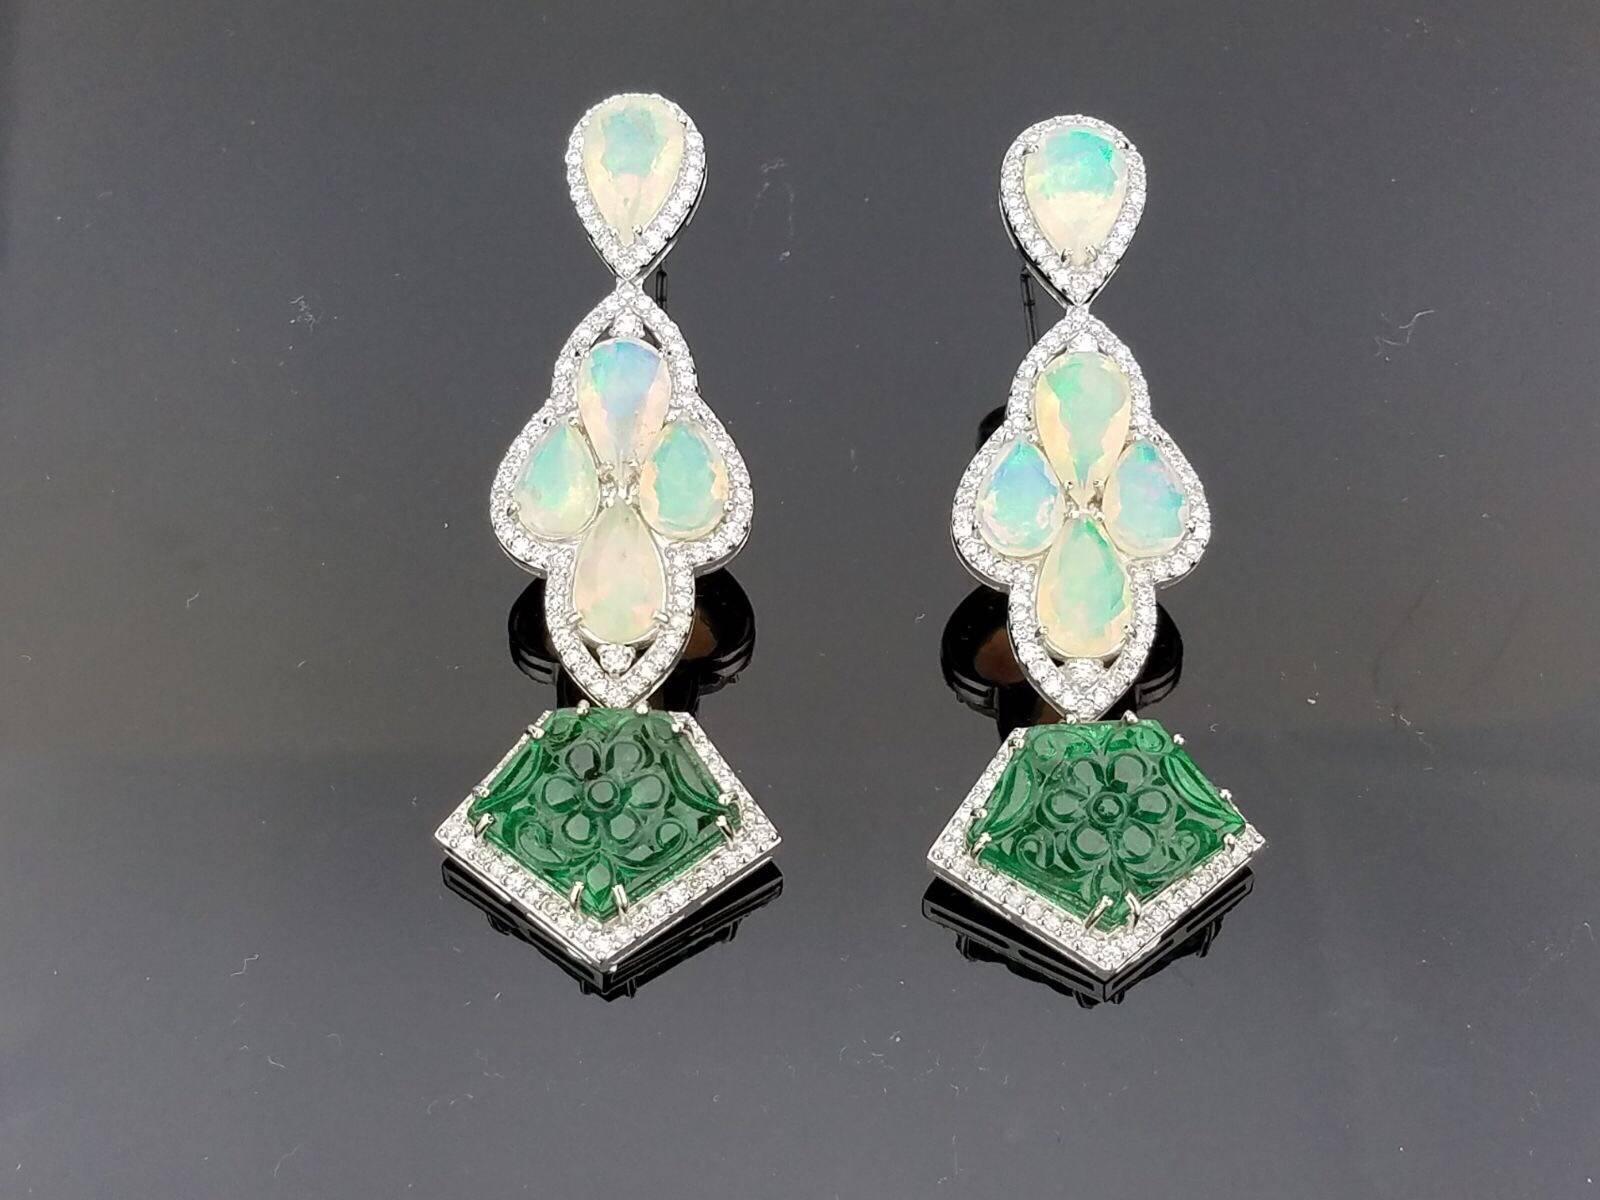 Unique Dangling Earrings, with Ethiopian Opals, Zambian Emeralds - outlined with Brilliant Cut Diamond all set in 18K White Gold

Stone Details:  
Stone: Ethiopian Opal, Pear shape, 9.26 carat
Stone: Zambian Emerald, Fancy Shape Carved, 18.14